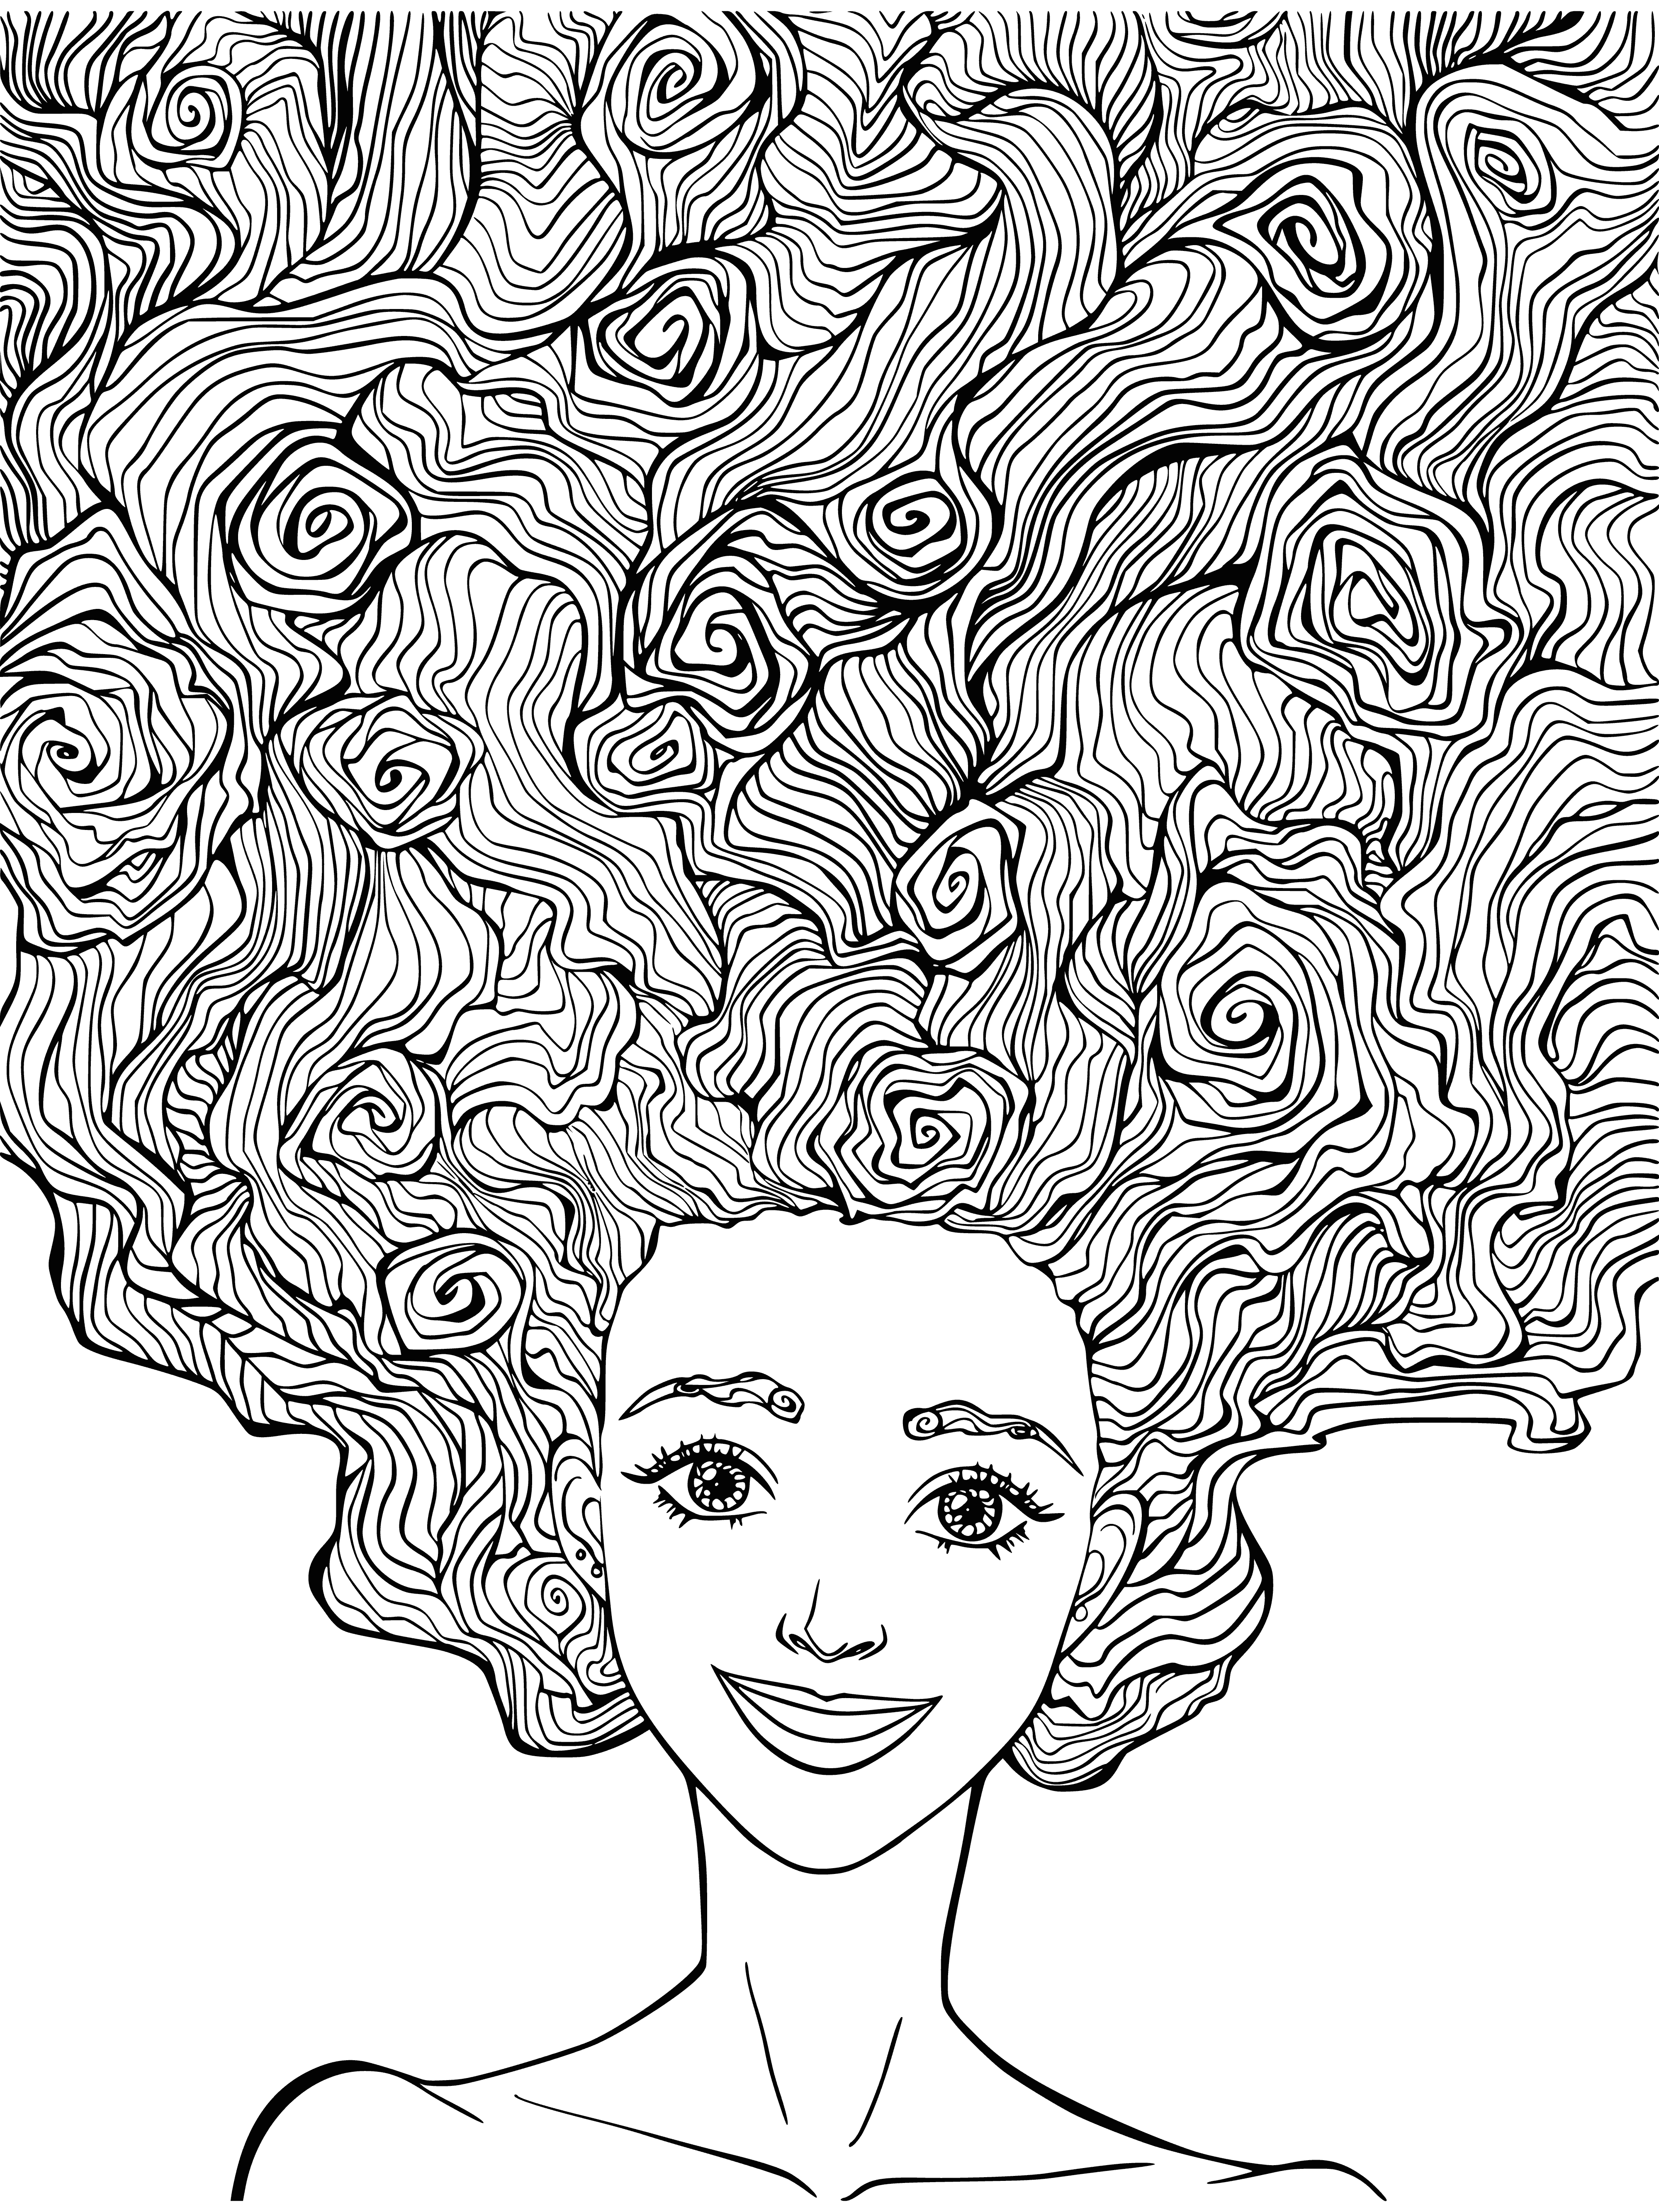 coloring page: Girl relaxes in nature, eyes closed, small smile - surrounded by intricate patterns and designs. #coloringbook